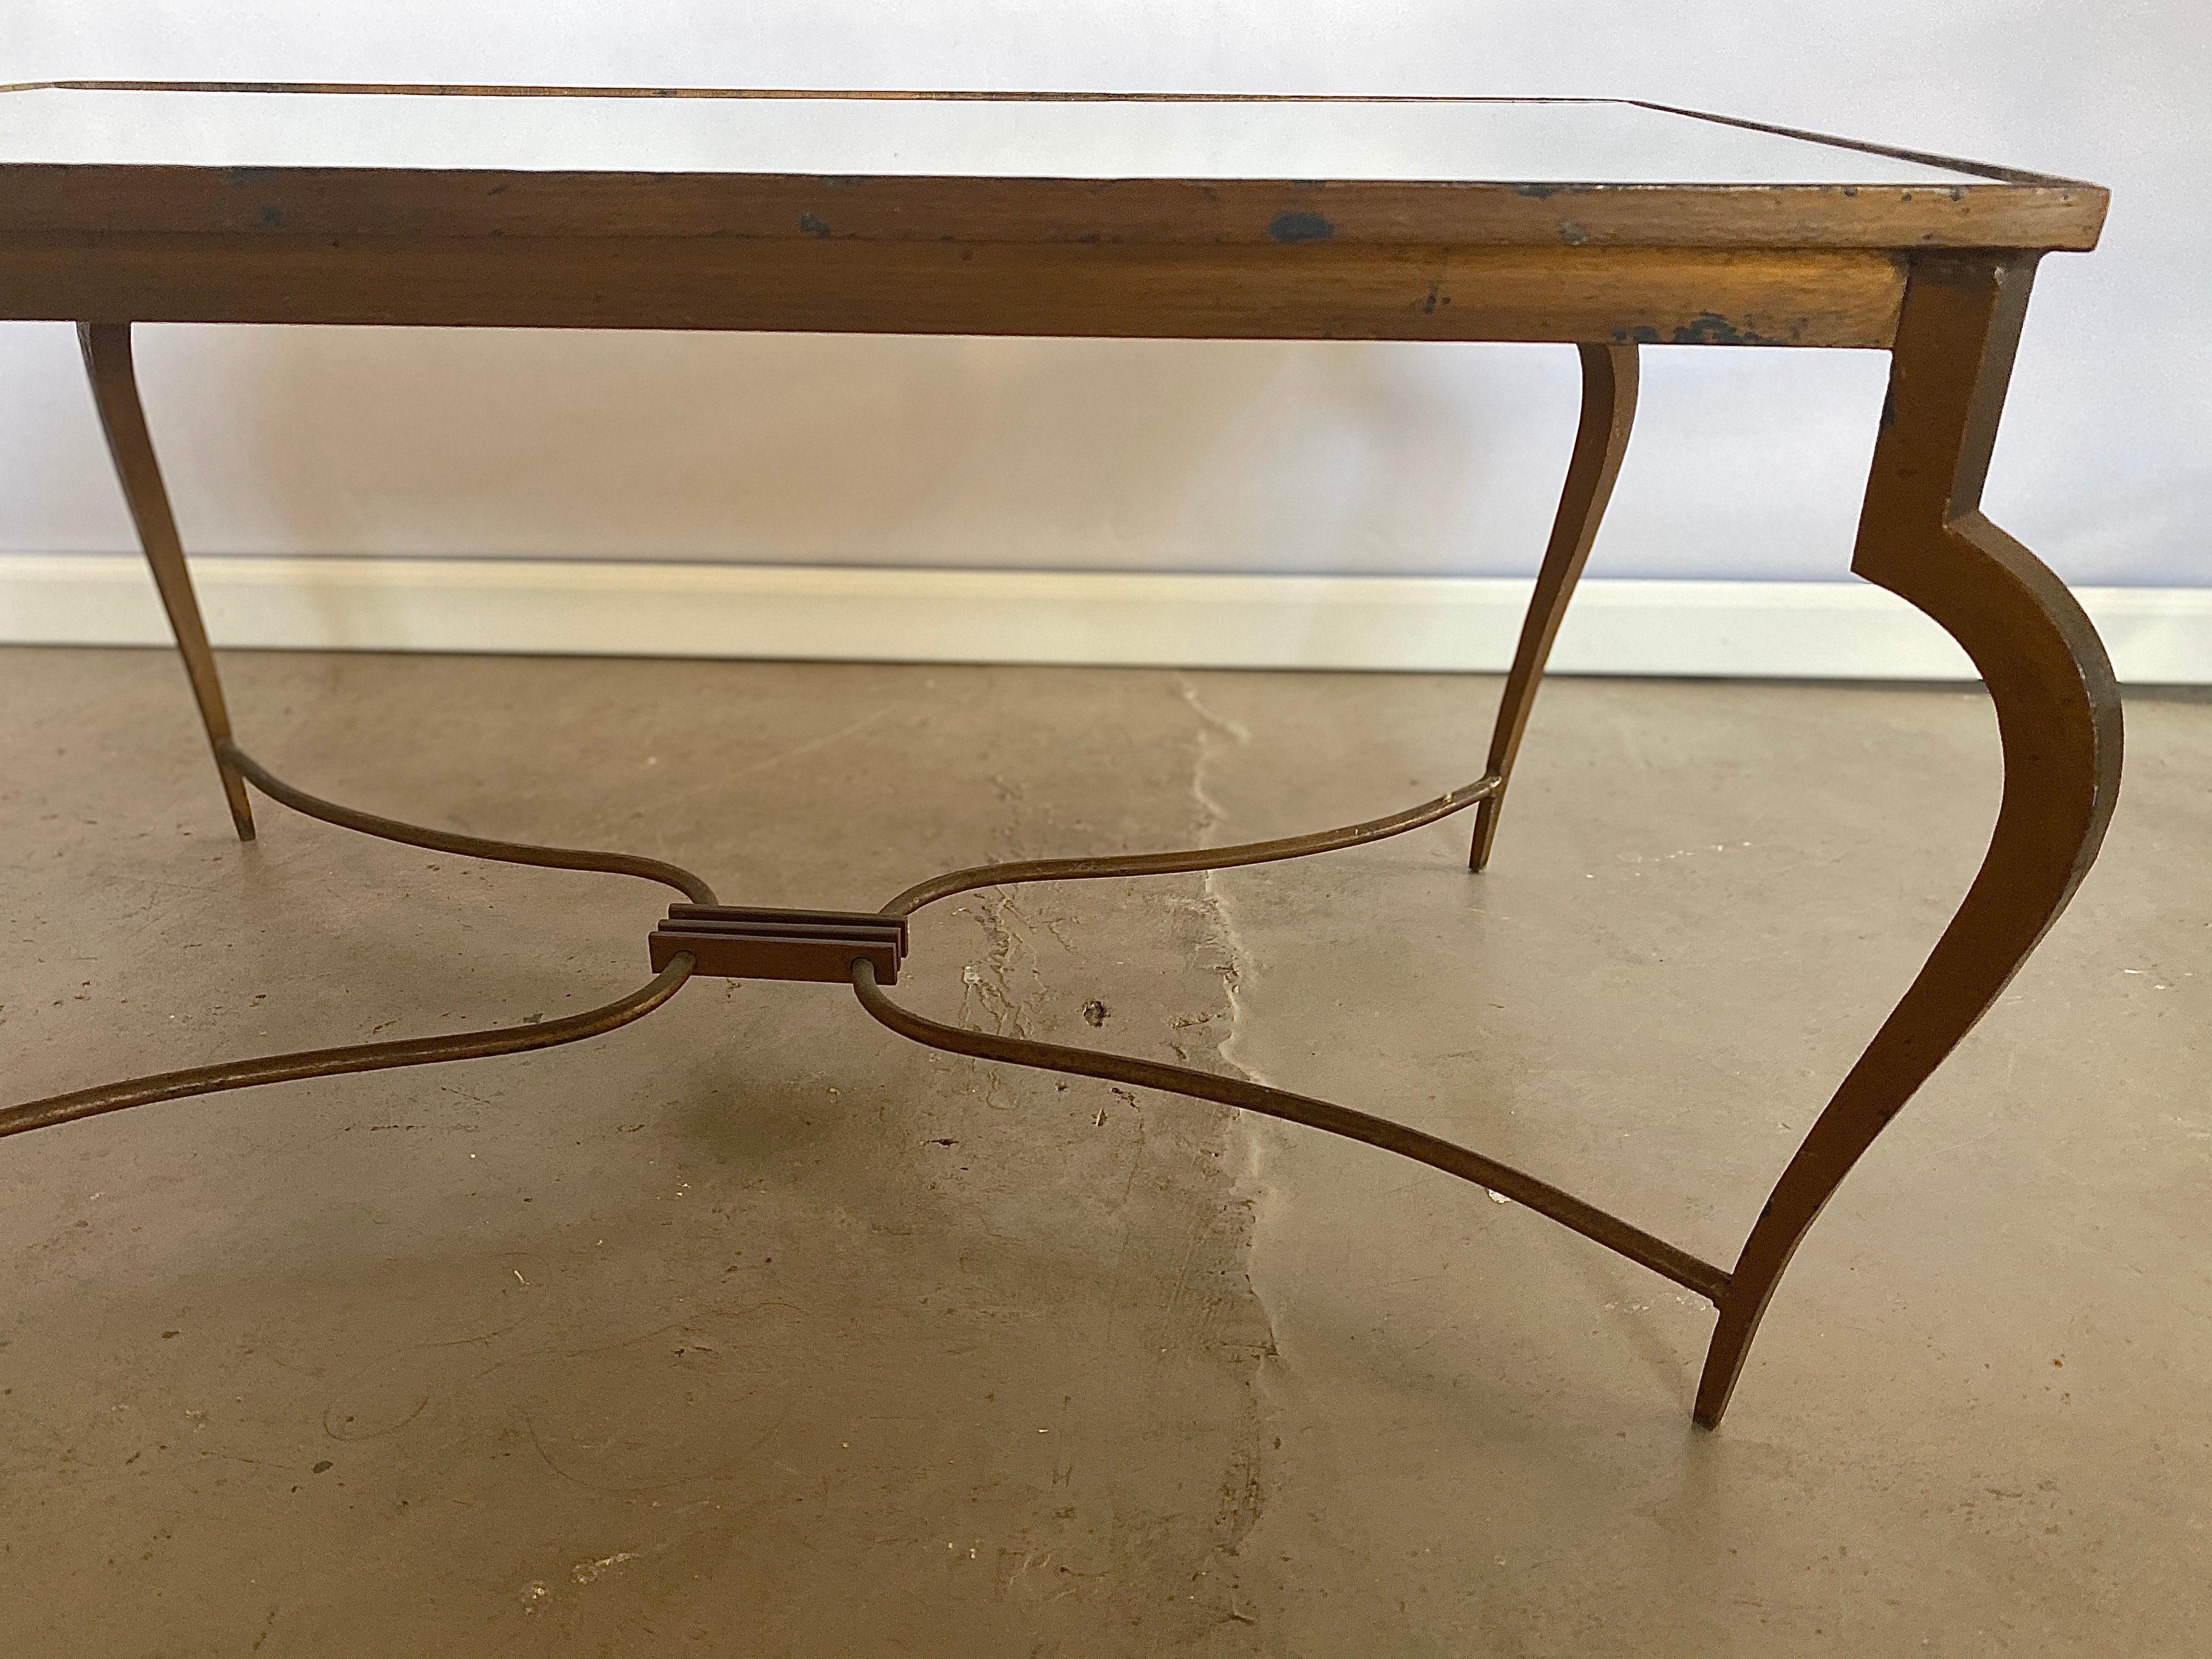 Mirrored René Prou Coffee or Cocktail Table in Gold Painted Forged Iron, 1940s In Fair Condition For Sale In Amsterdam, NL